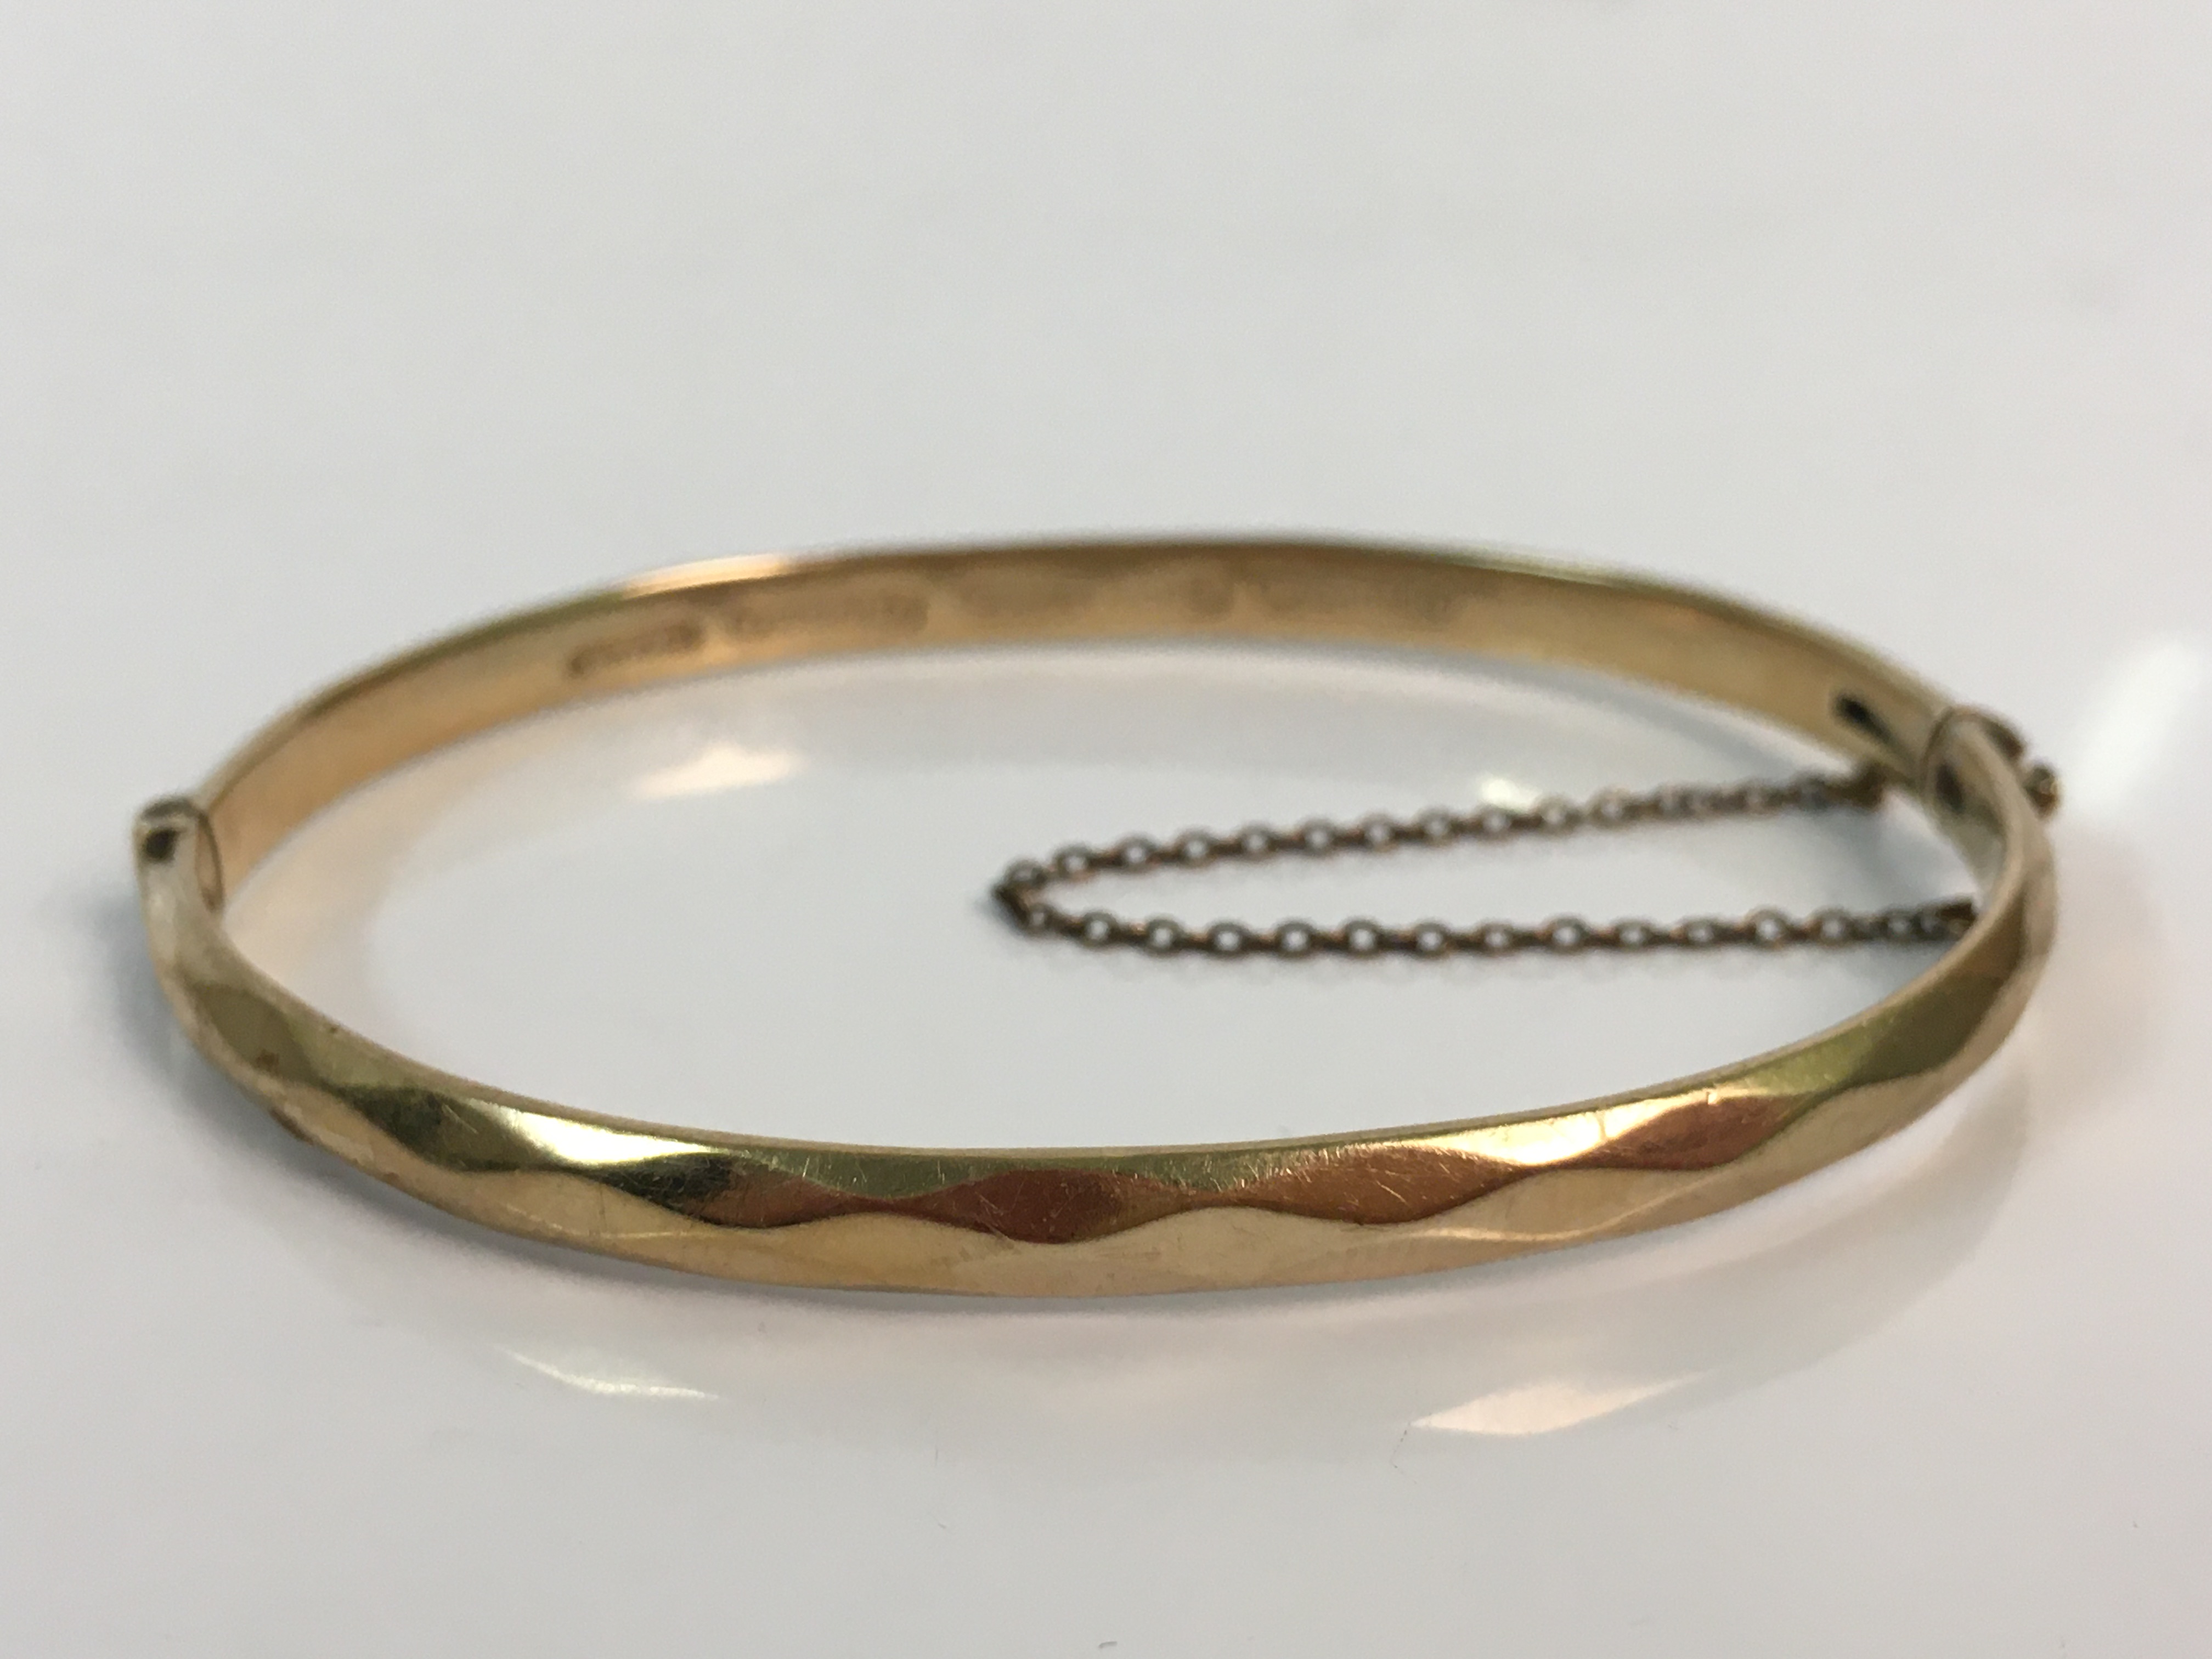 A 9ct yellow gold bangle with silver core, approx. weight 14.6gms. Online viewing and bidding